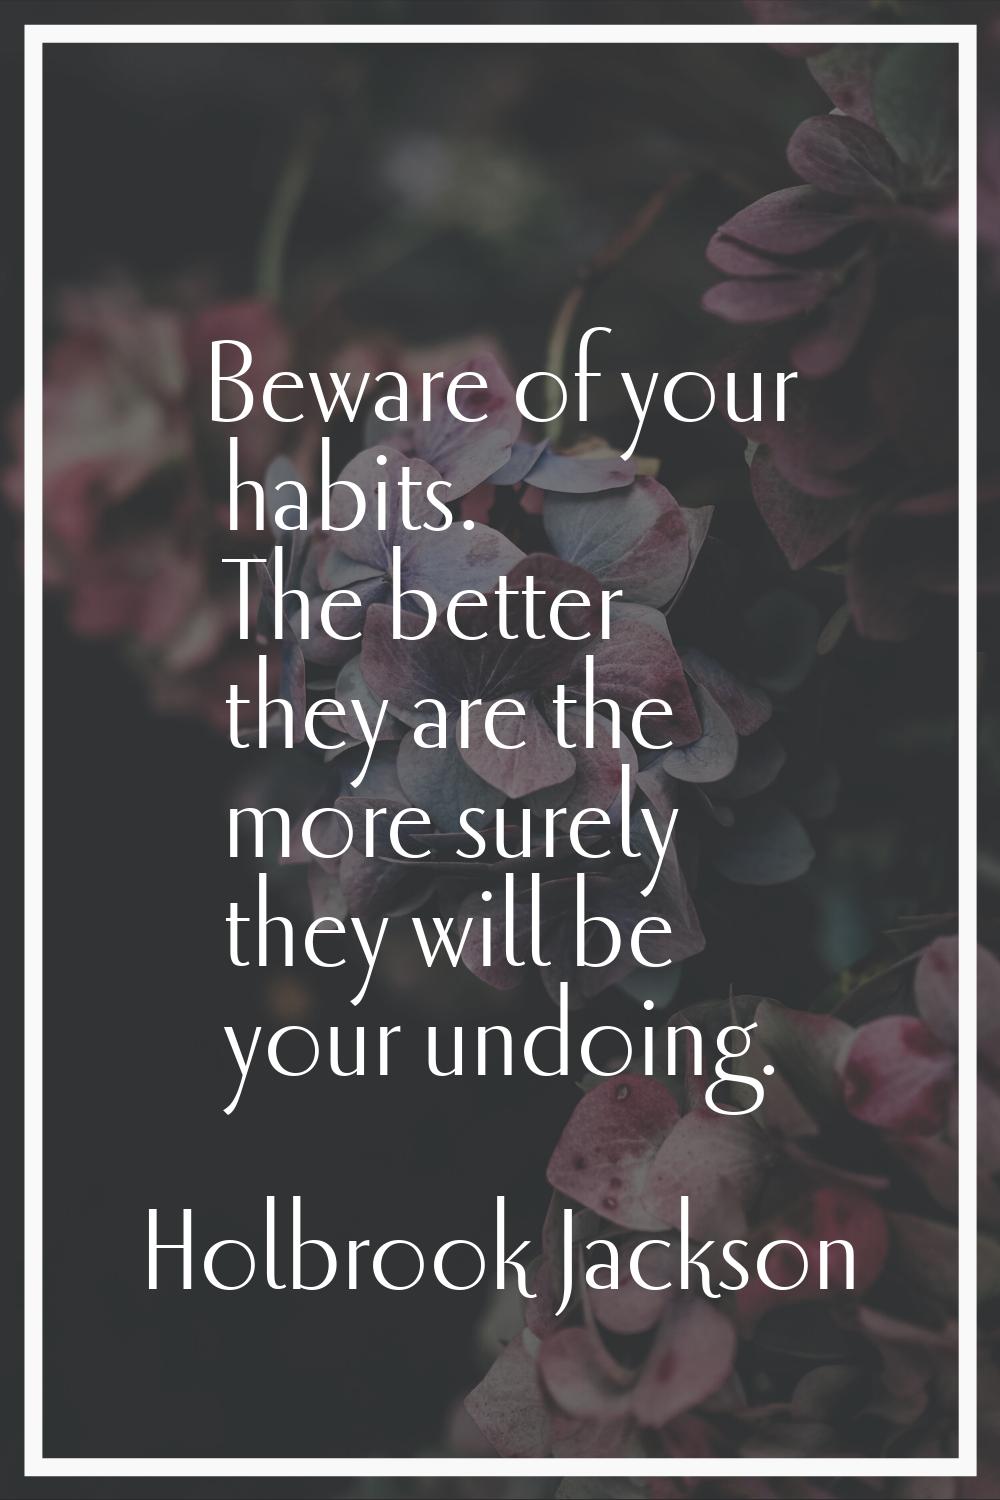 Beware of your habits. The better they are the more surely they will be your undoing.